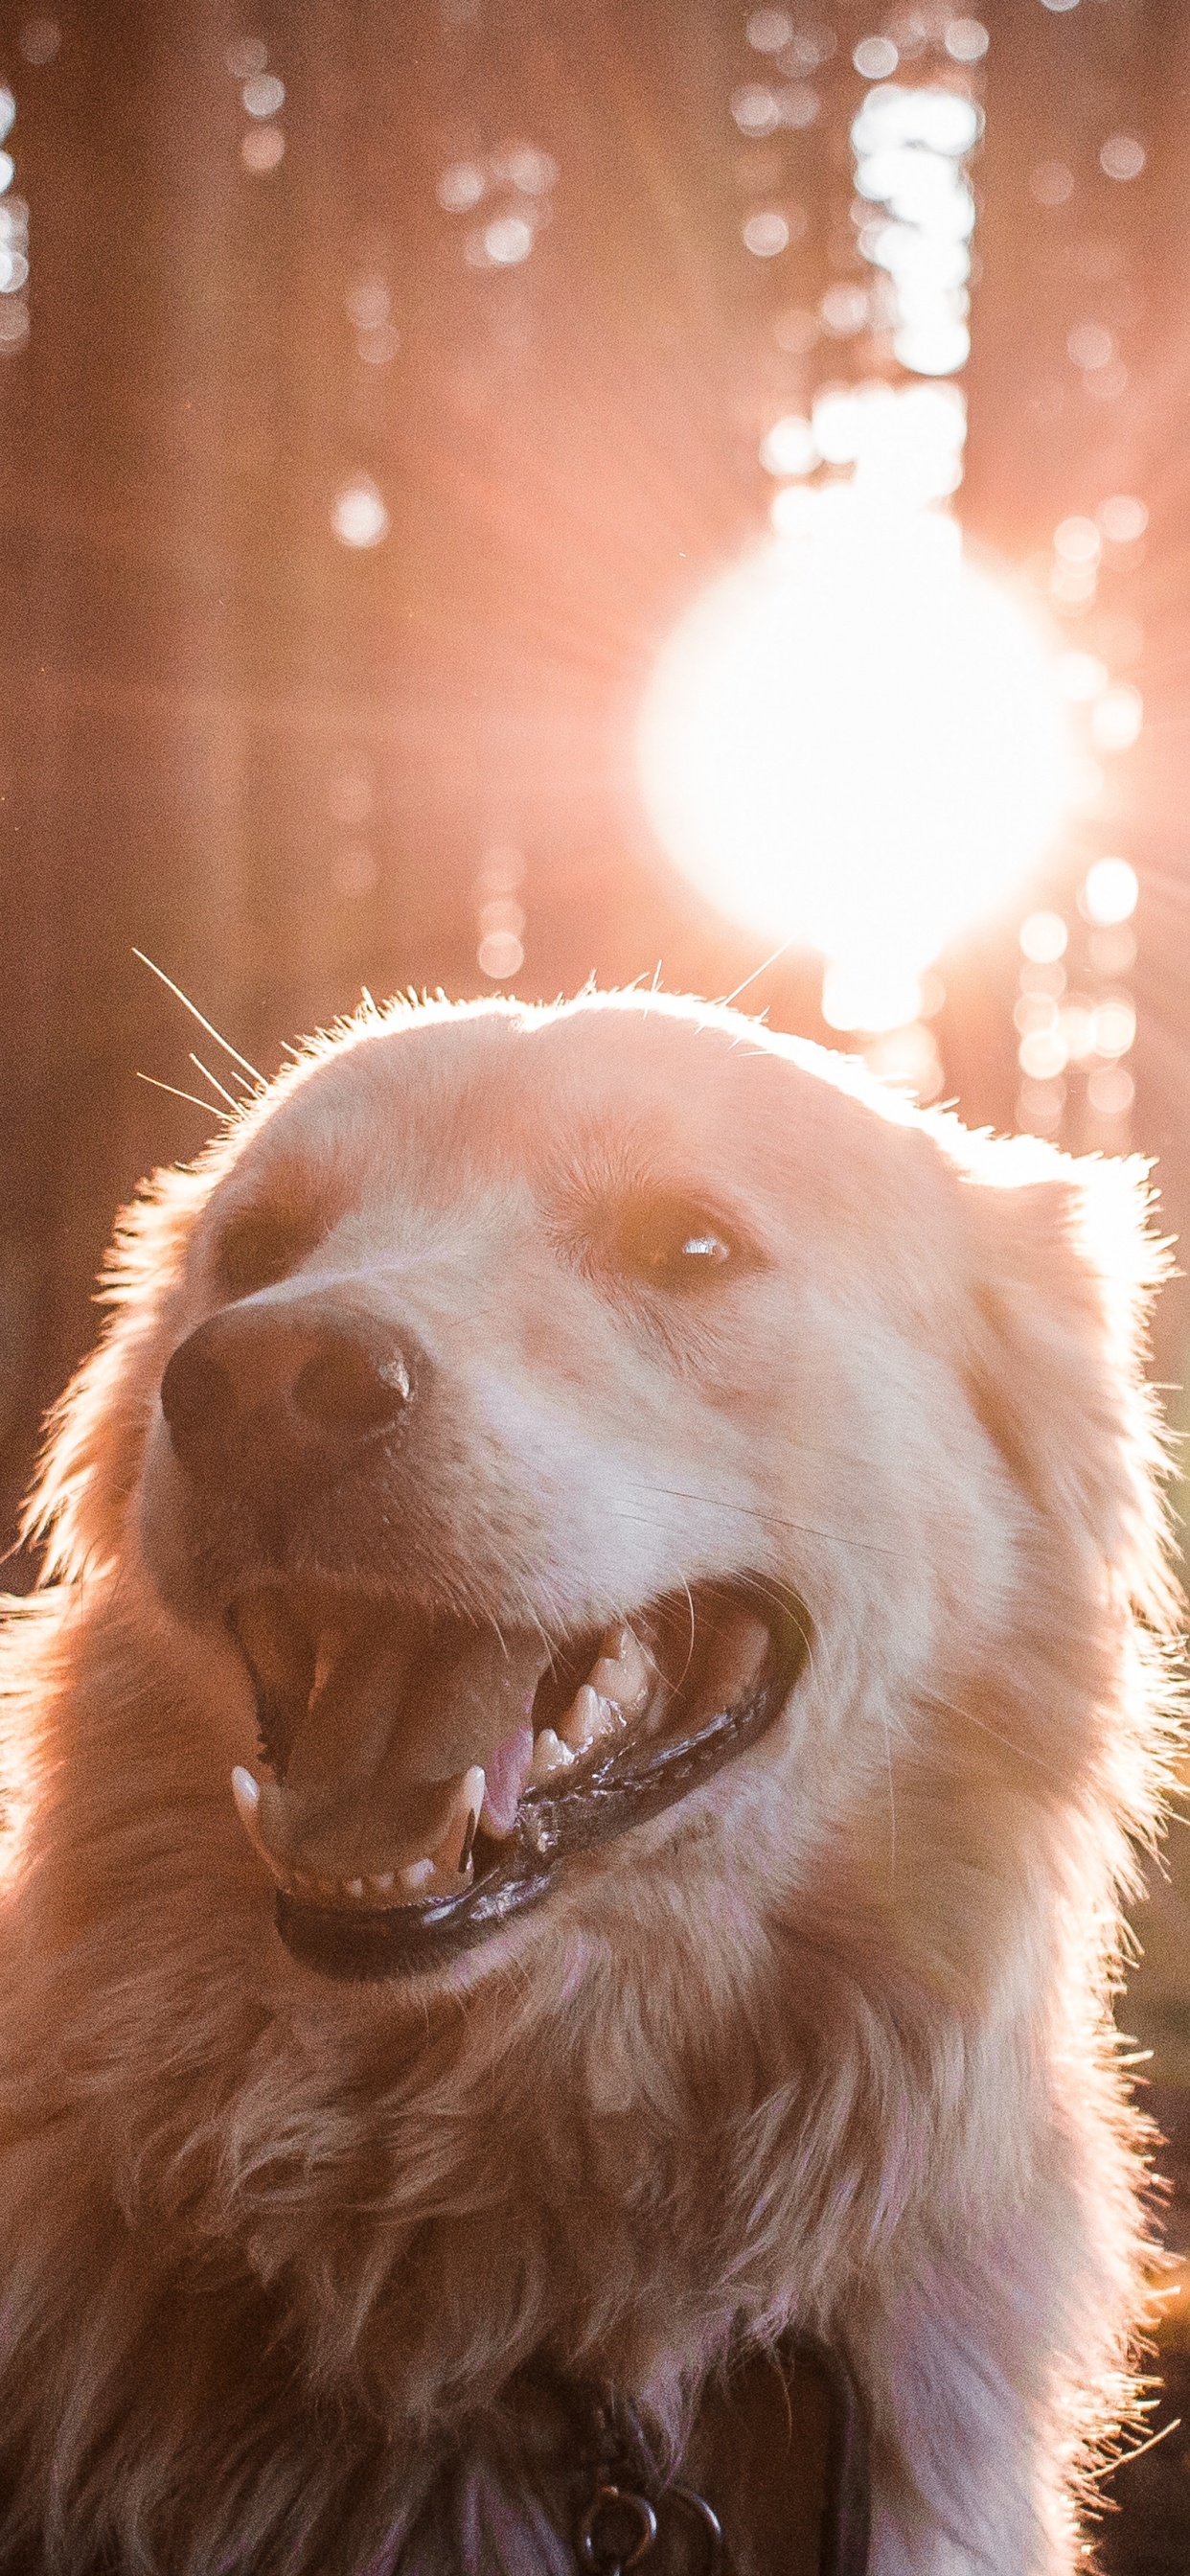 Golden Retriever With Yellow Ball on Mouth. Wallpaper in 1242x2688 Resolution